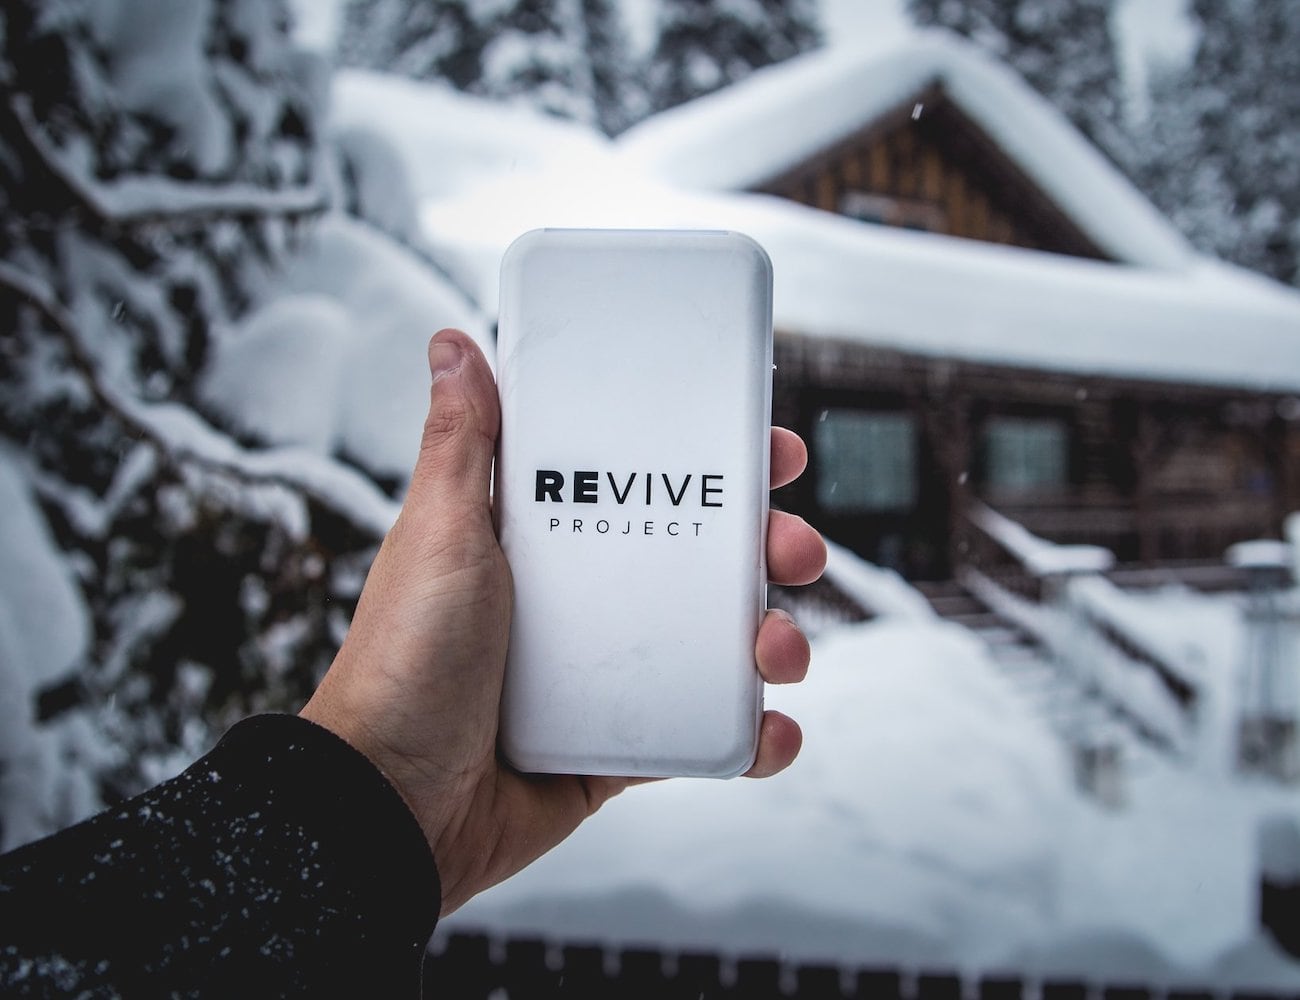 REVIVE 10,000 mAh High-Speed Power Bank charges with style